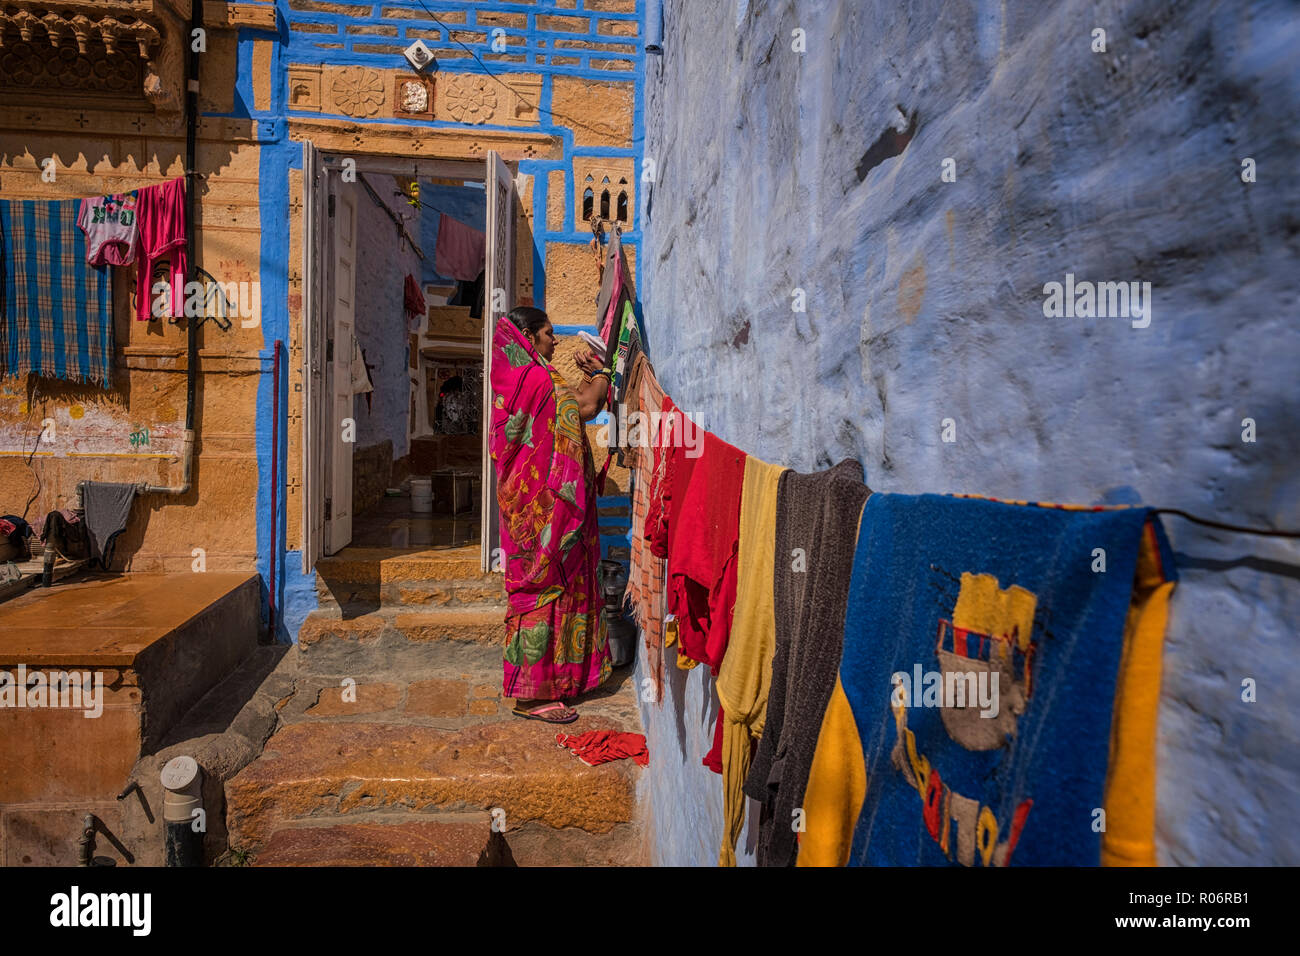 Daily life activities in Jaisalmer fort in India. Stock Photo